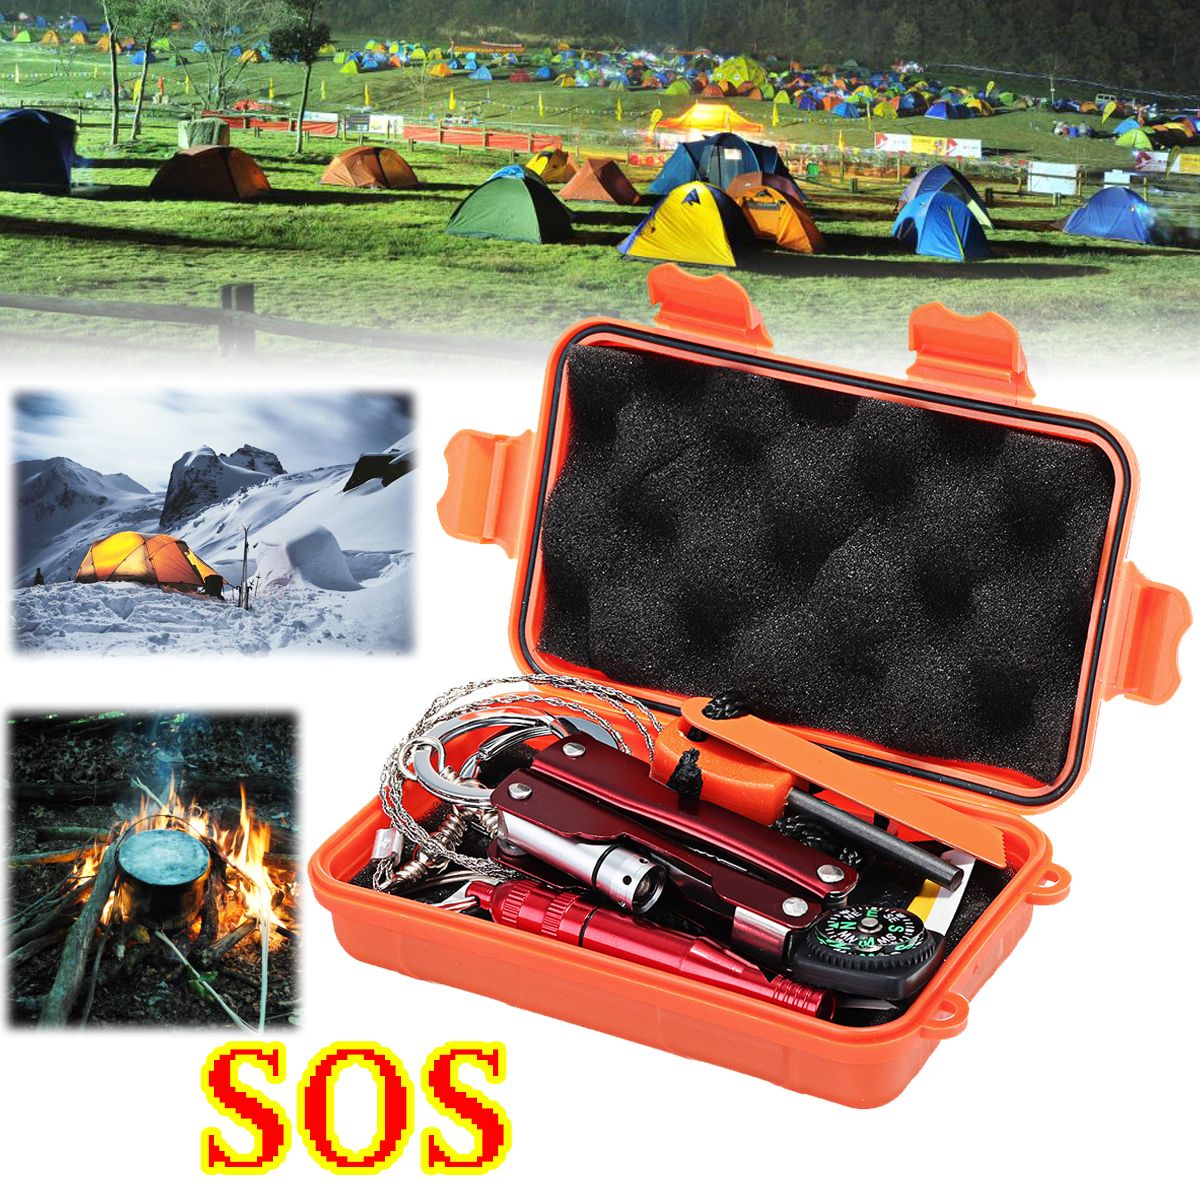 SOS-Outdoor-Survival-First-Aid-Hiking-Kit-Camping-Rescue-Gear-Emergency-1358549